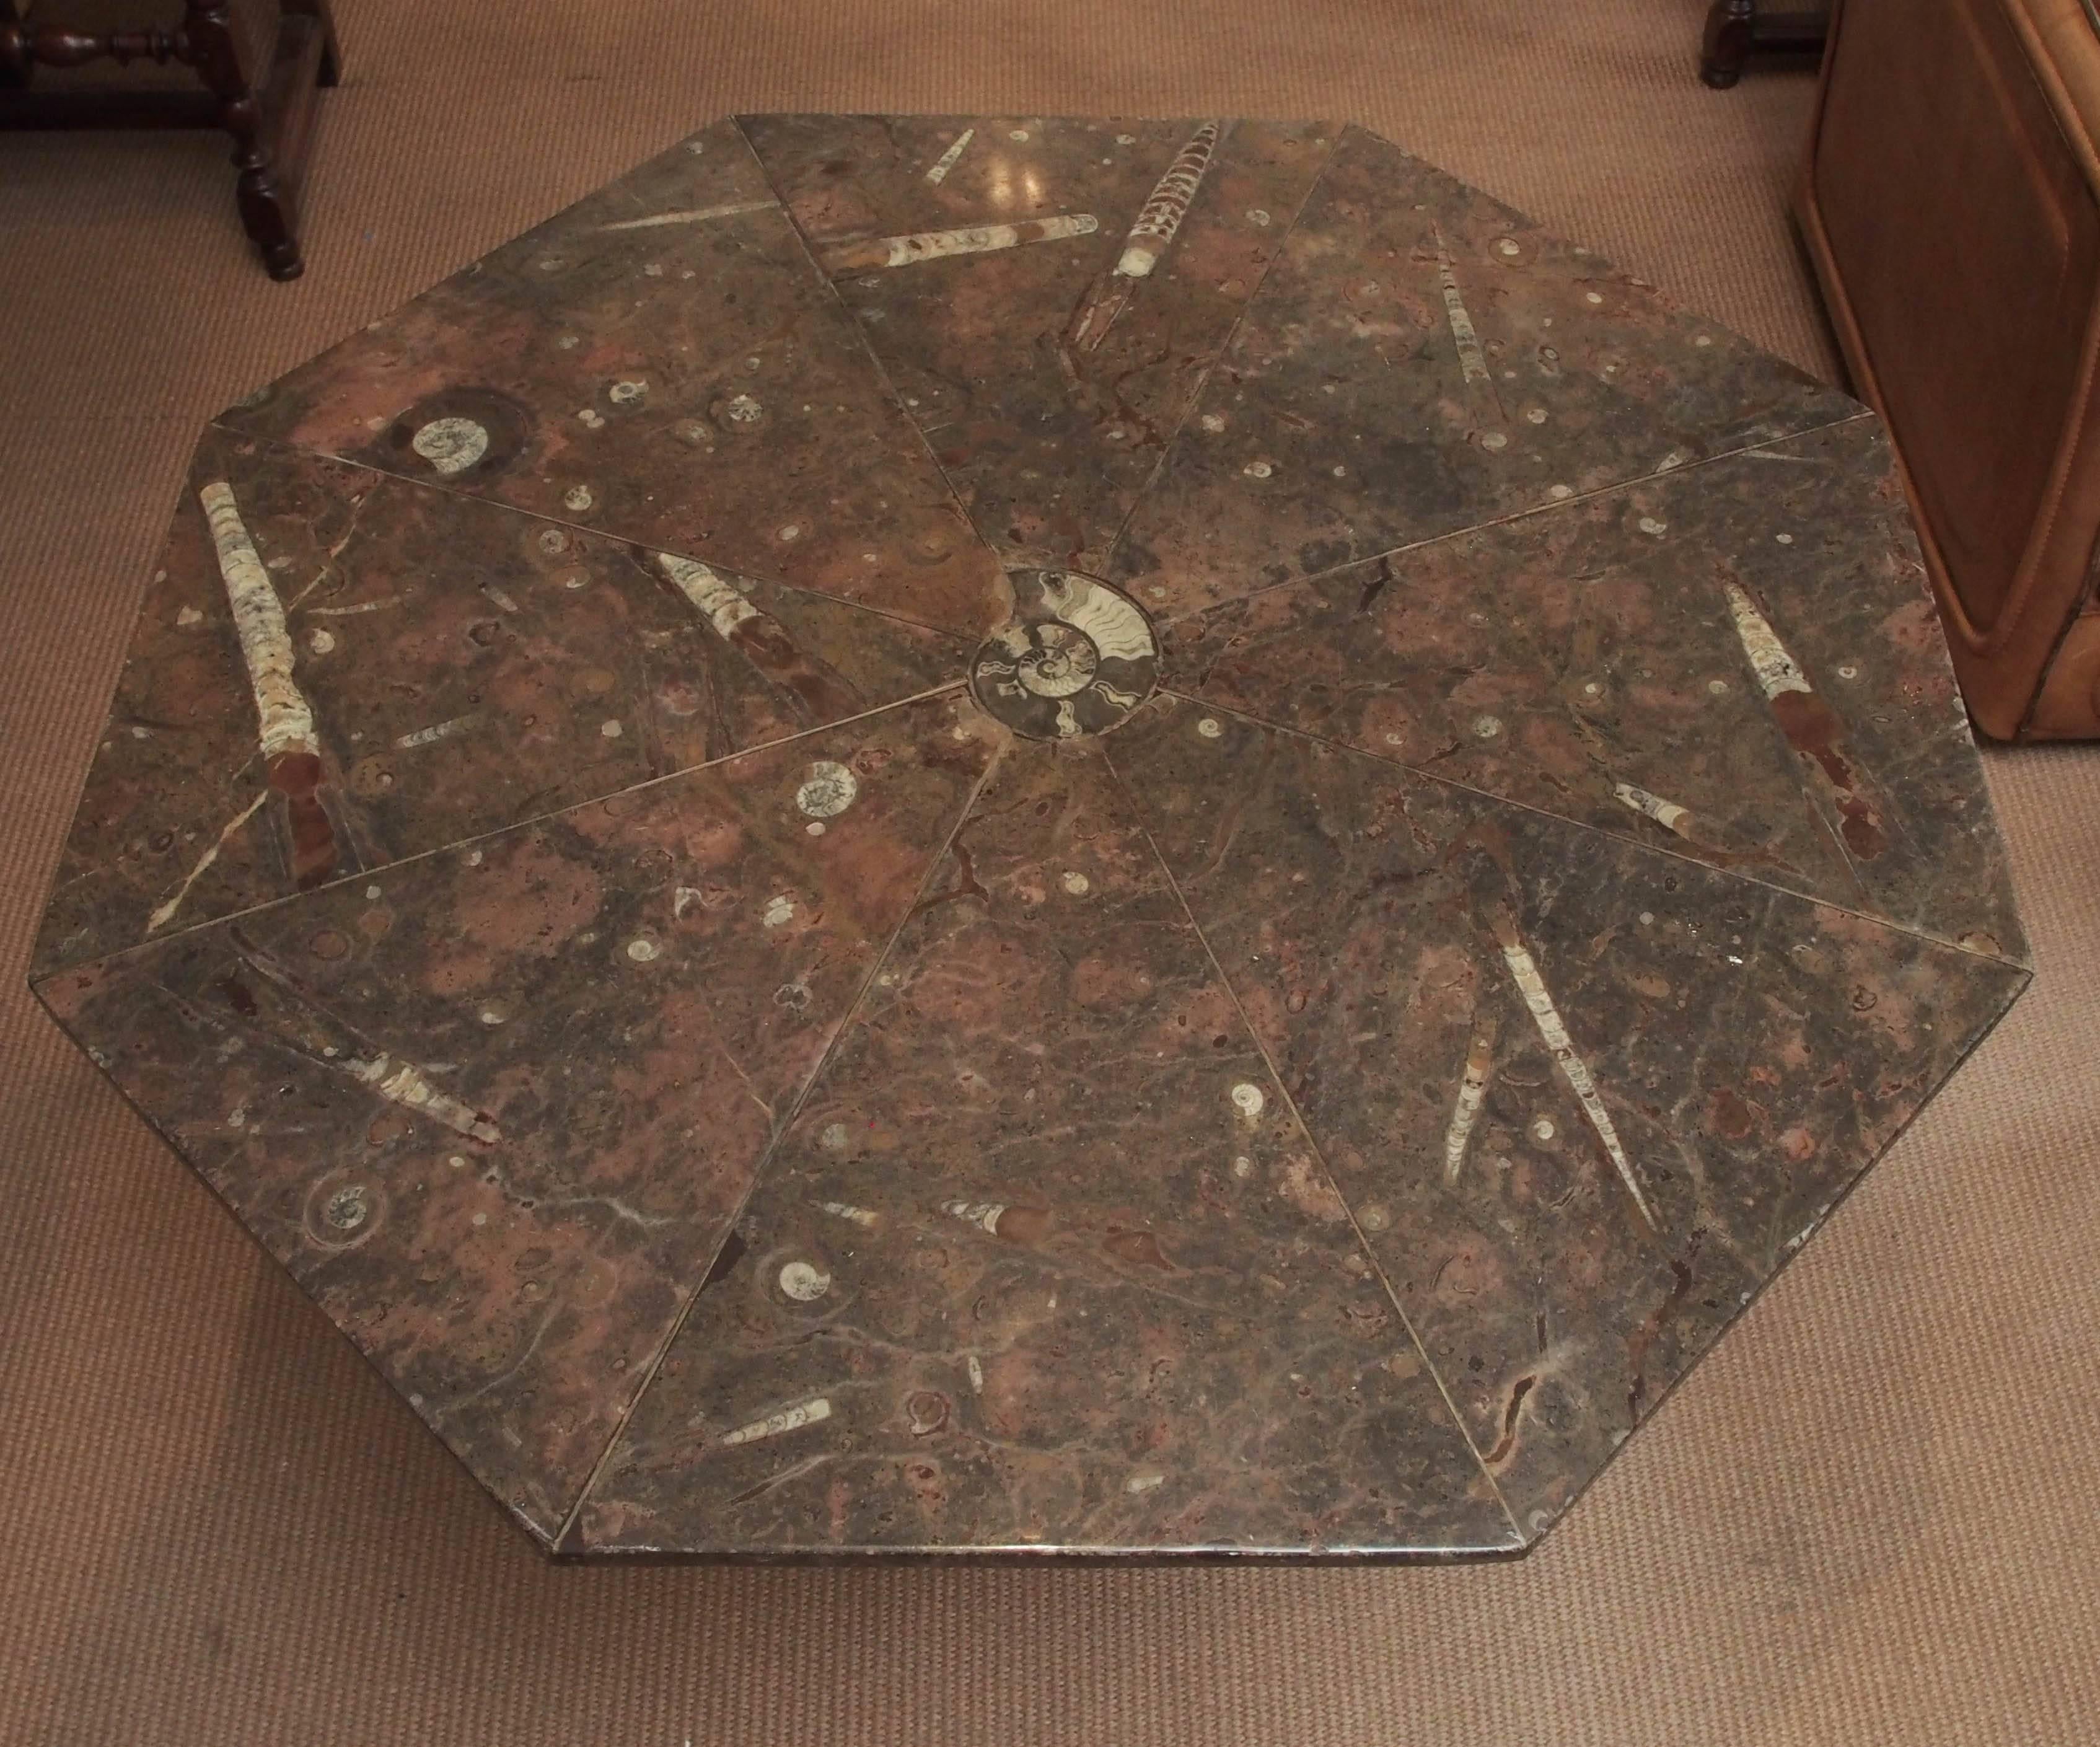 Octagonal table of fossil marble with metal base, Mid-Century, French. 40 inches in diameter by 28 3/4 inches high.